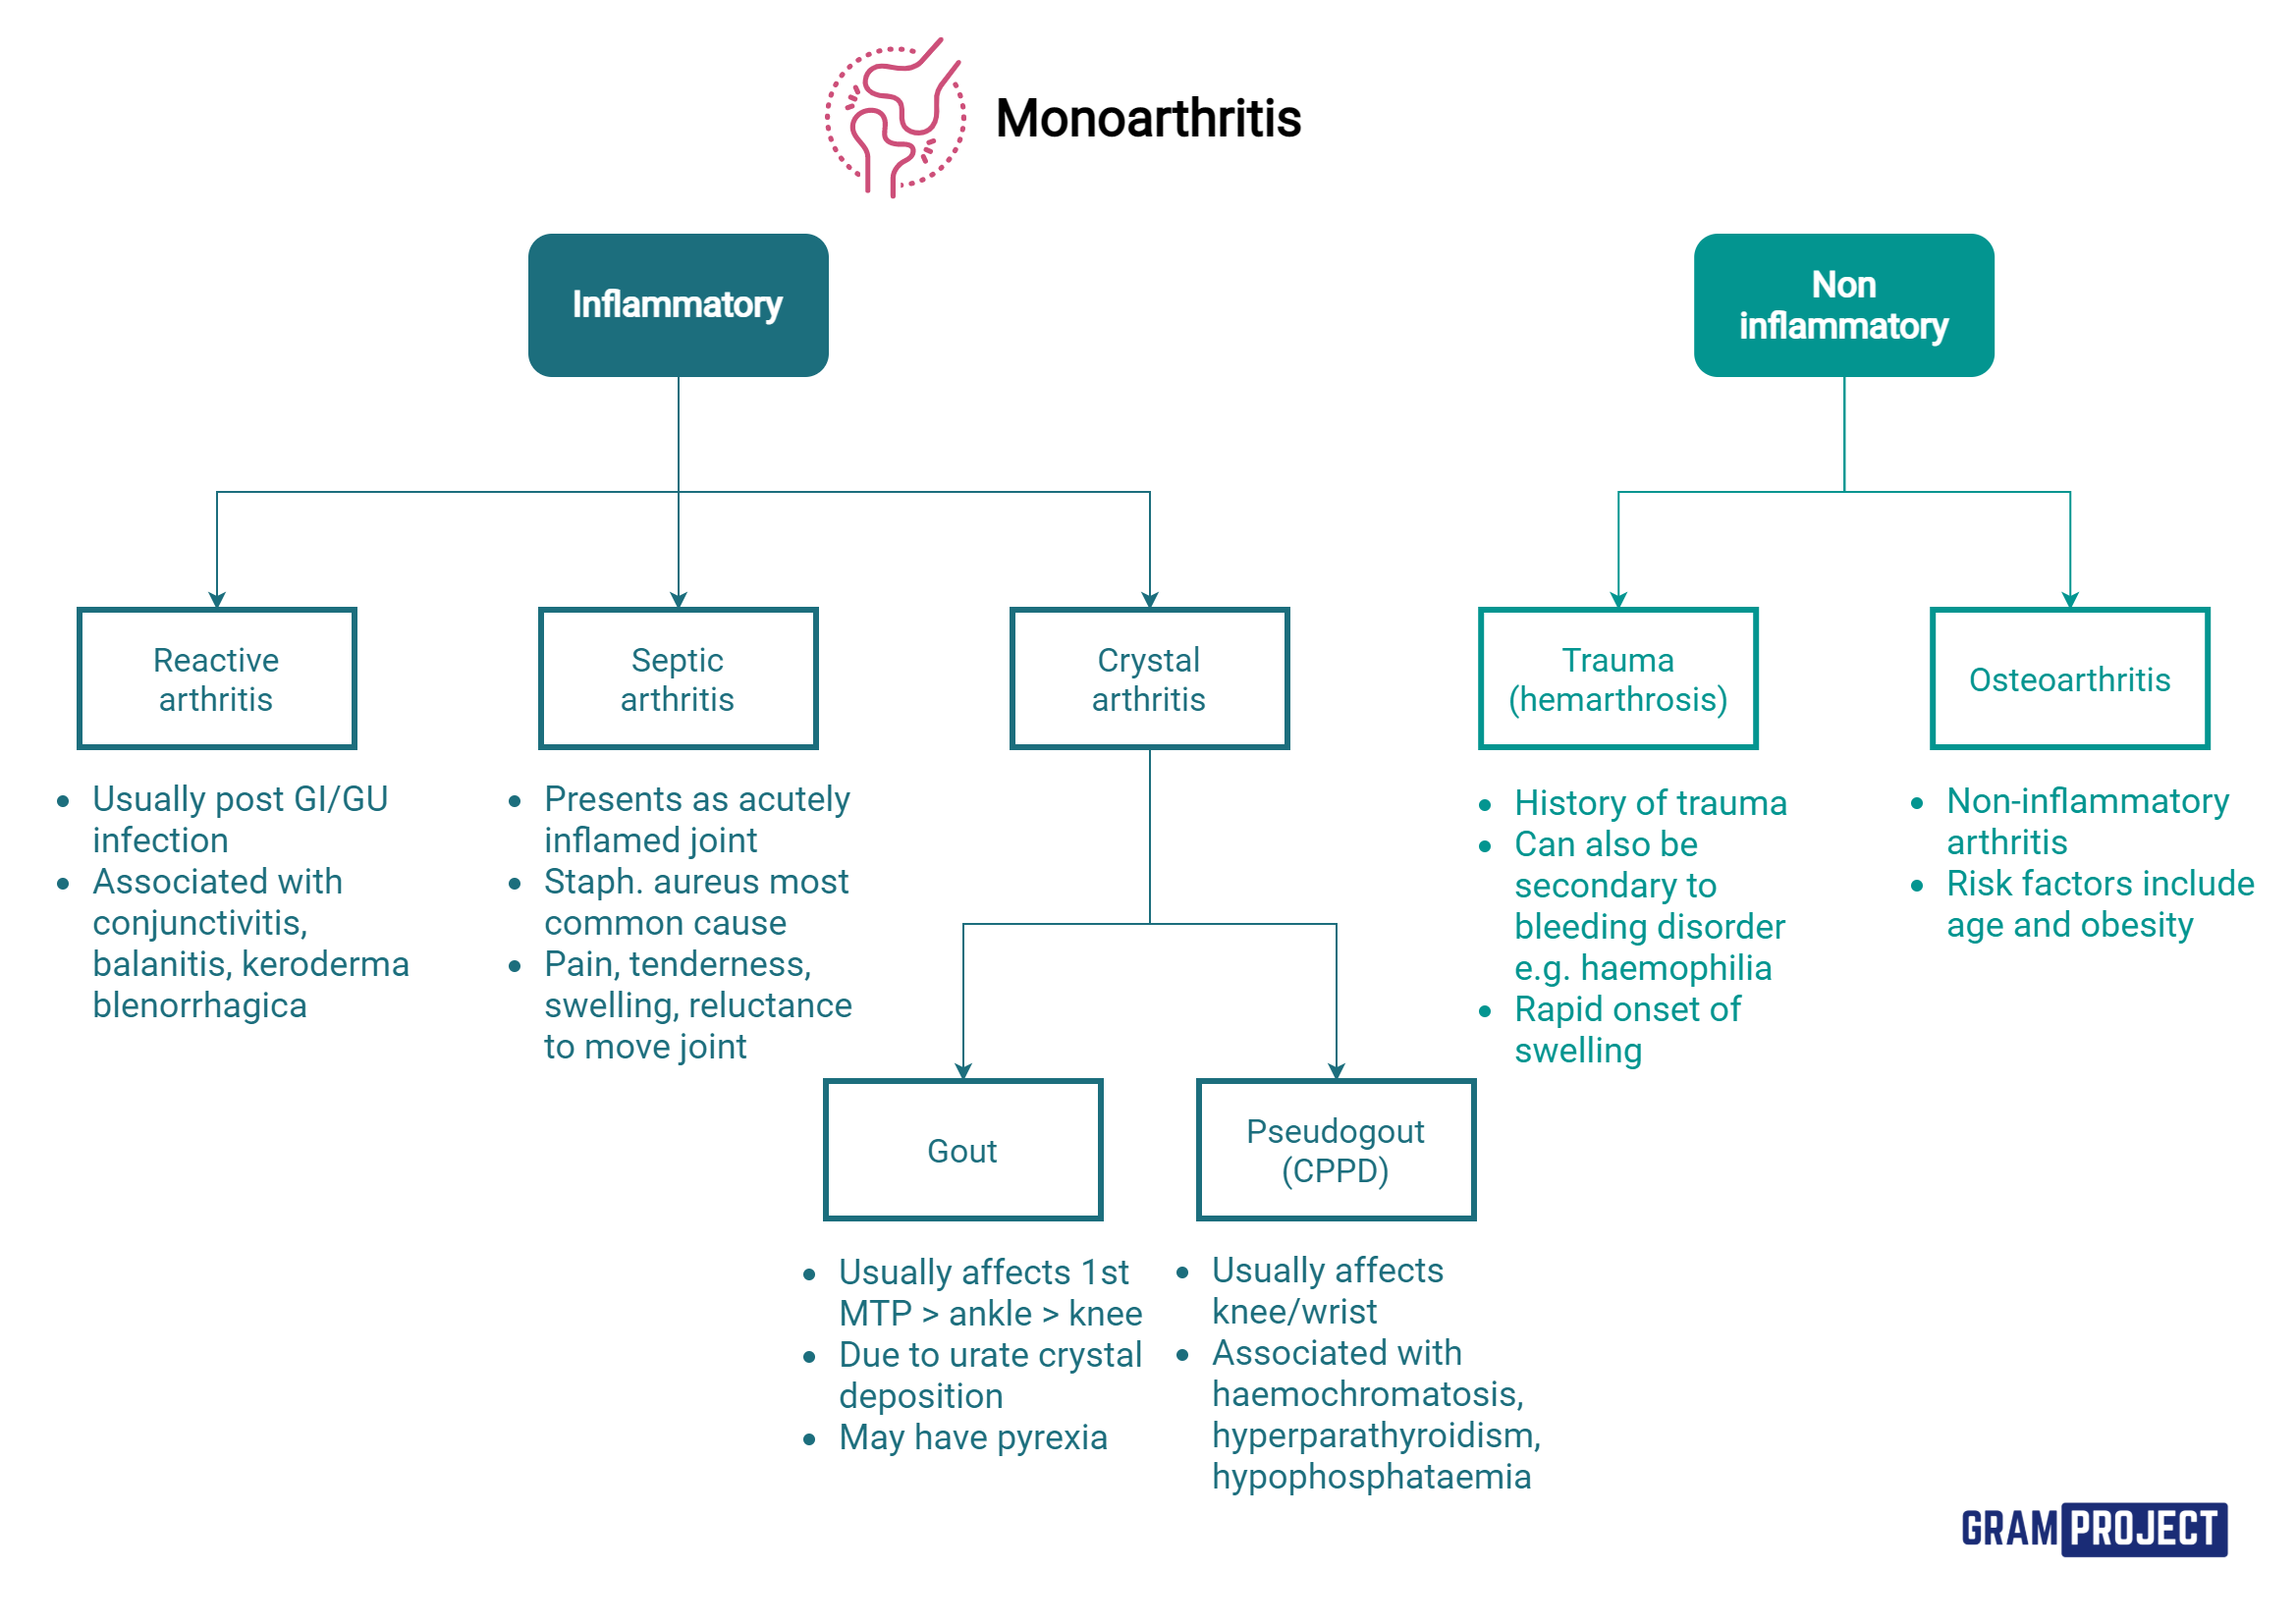 Diagnostic algorithm to approaching a patient presenting with monoarthritis